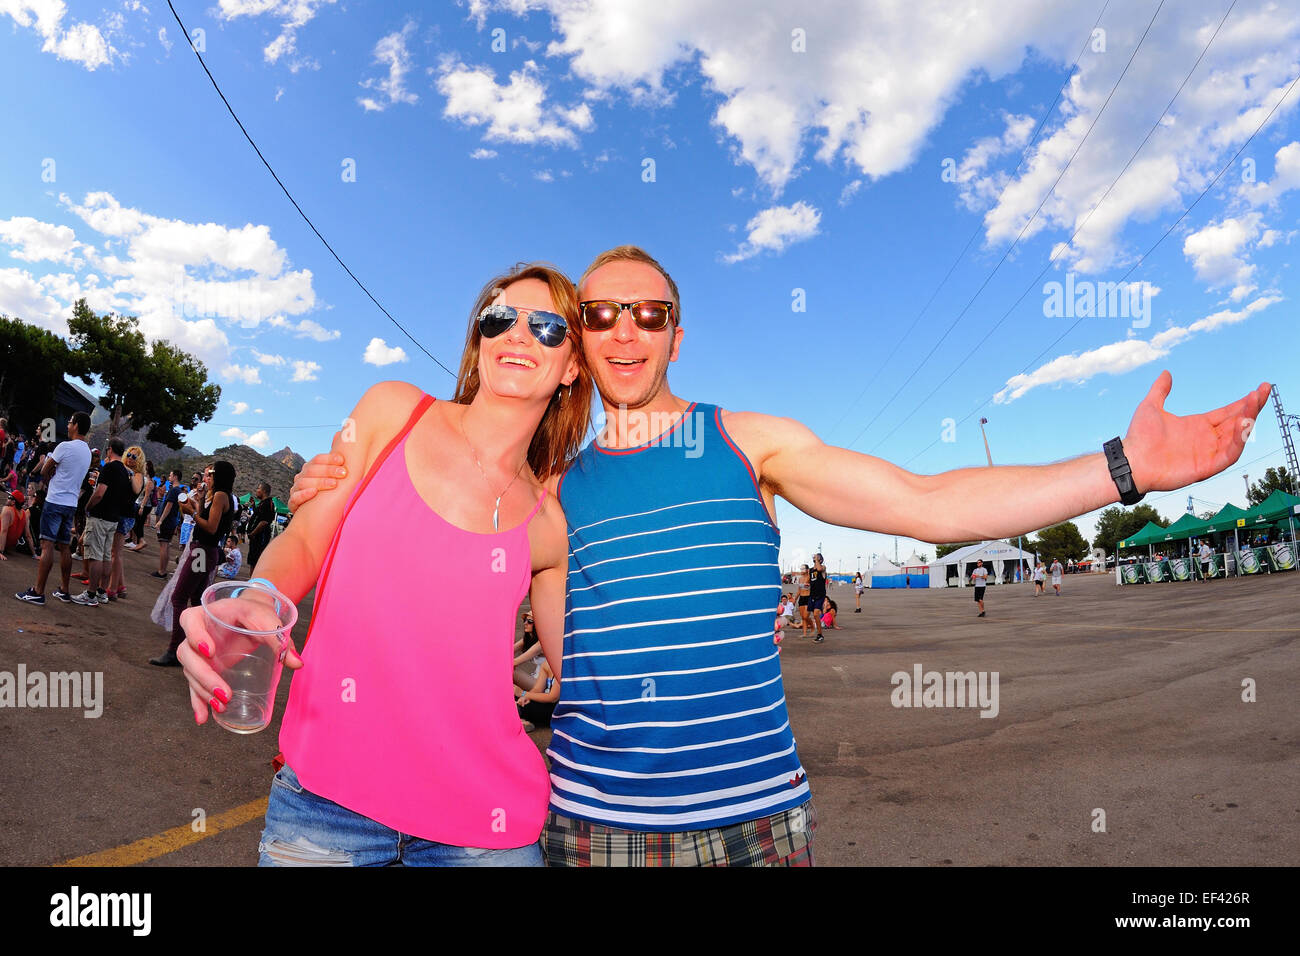 BENICASSIM, SPAIN - JULY 20: People have fun at FIB Festival on July 20, 2014 in Benicassim, Spain. Stock Photo